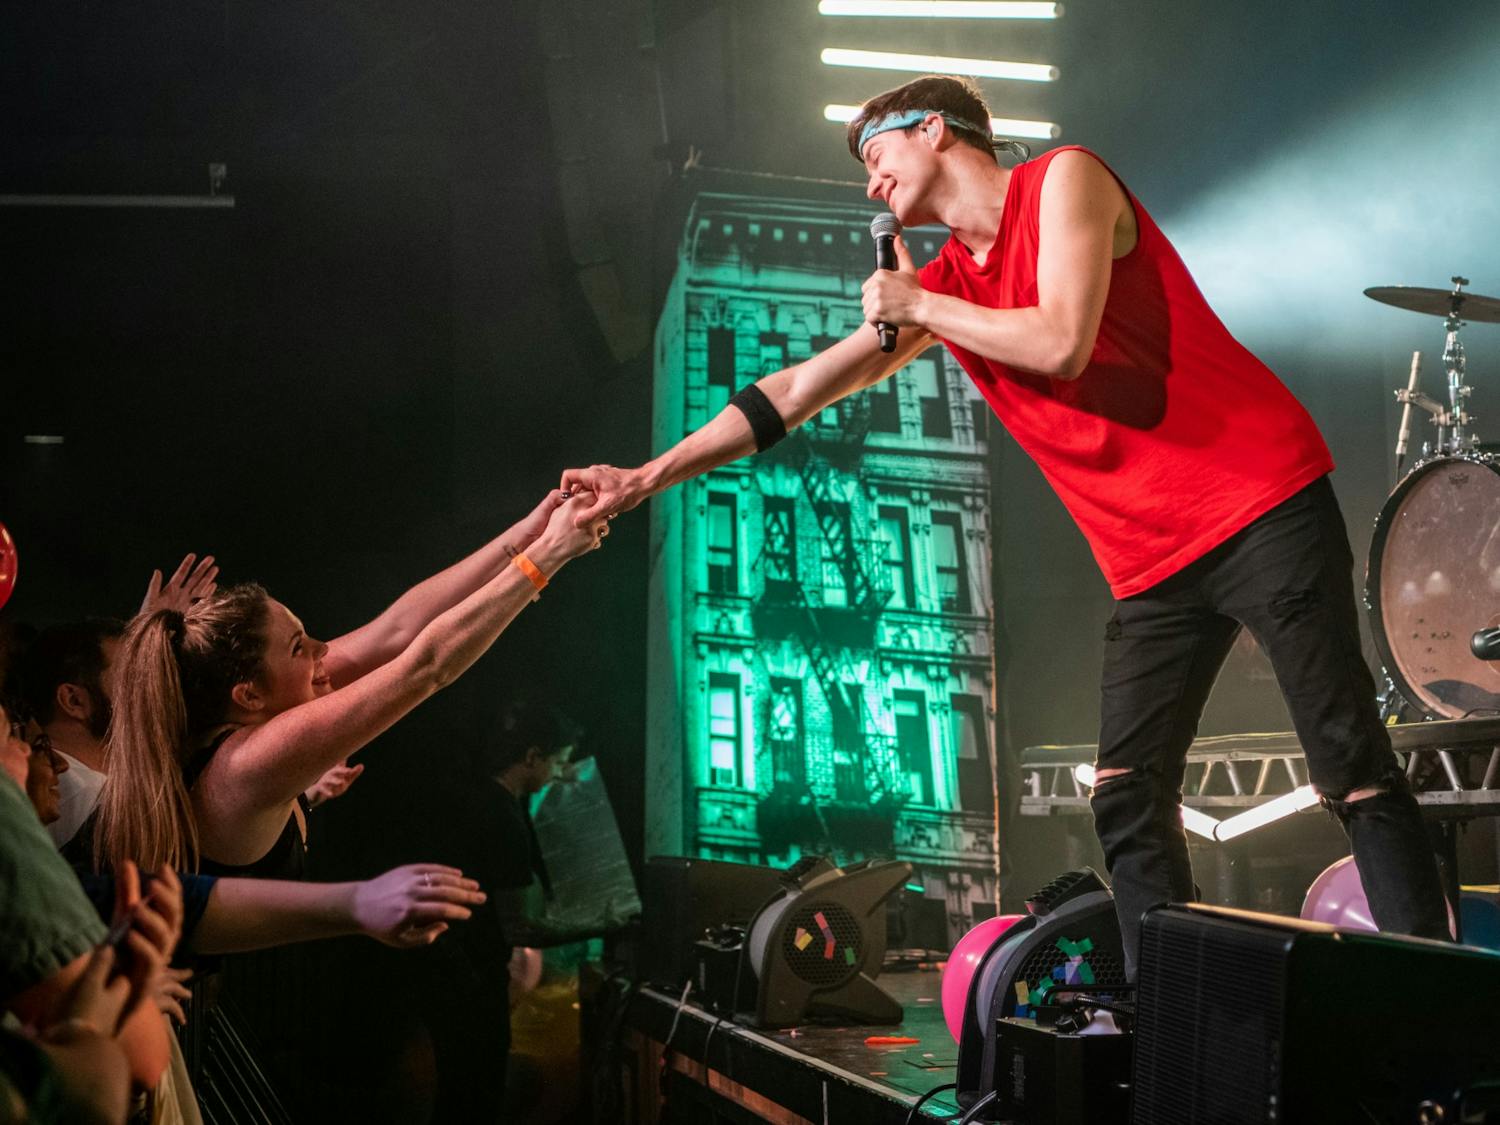 Matt Johnson holds hands with a fan during a song at their concert at the Senate in November 2019. Johnson interacted with individual fans multiple times throughout the show.